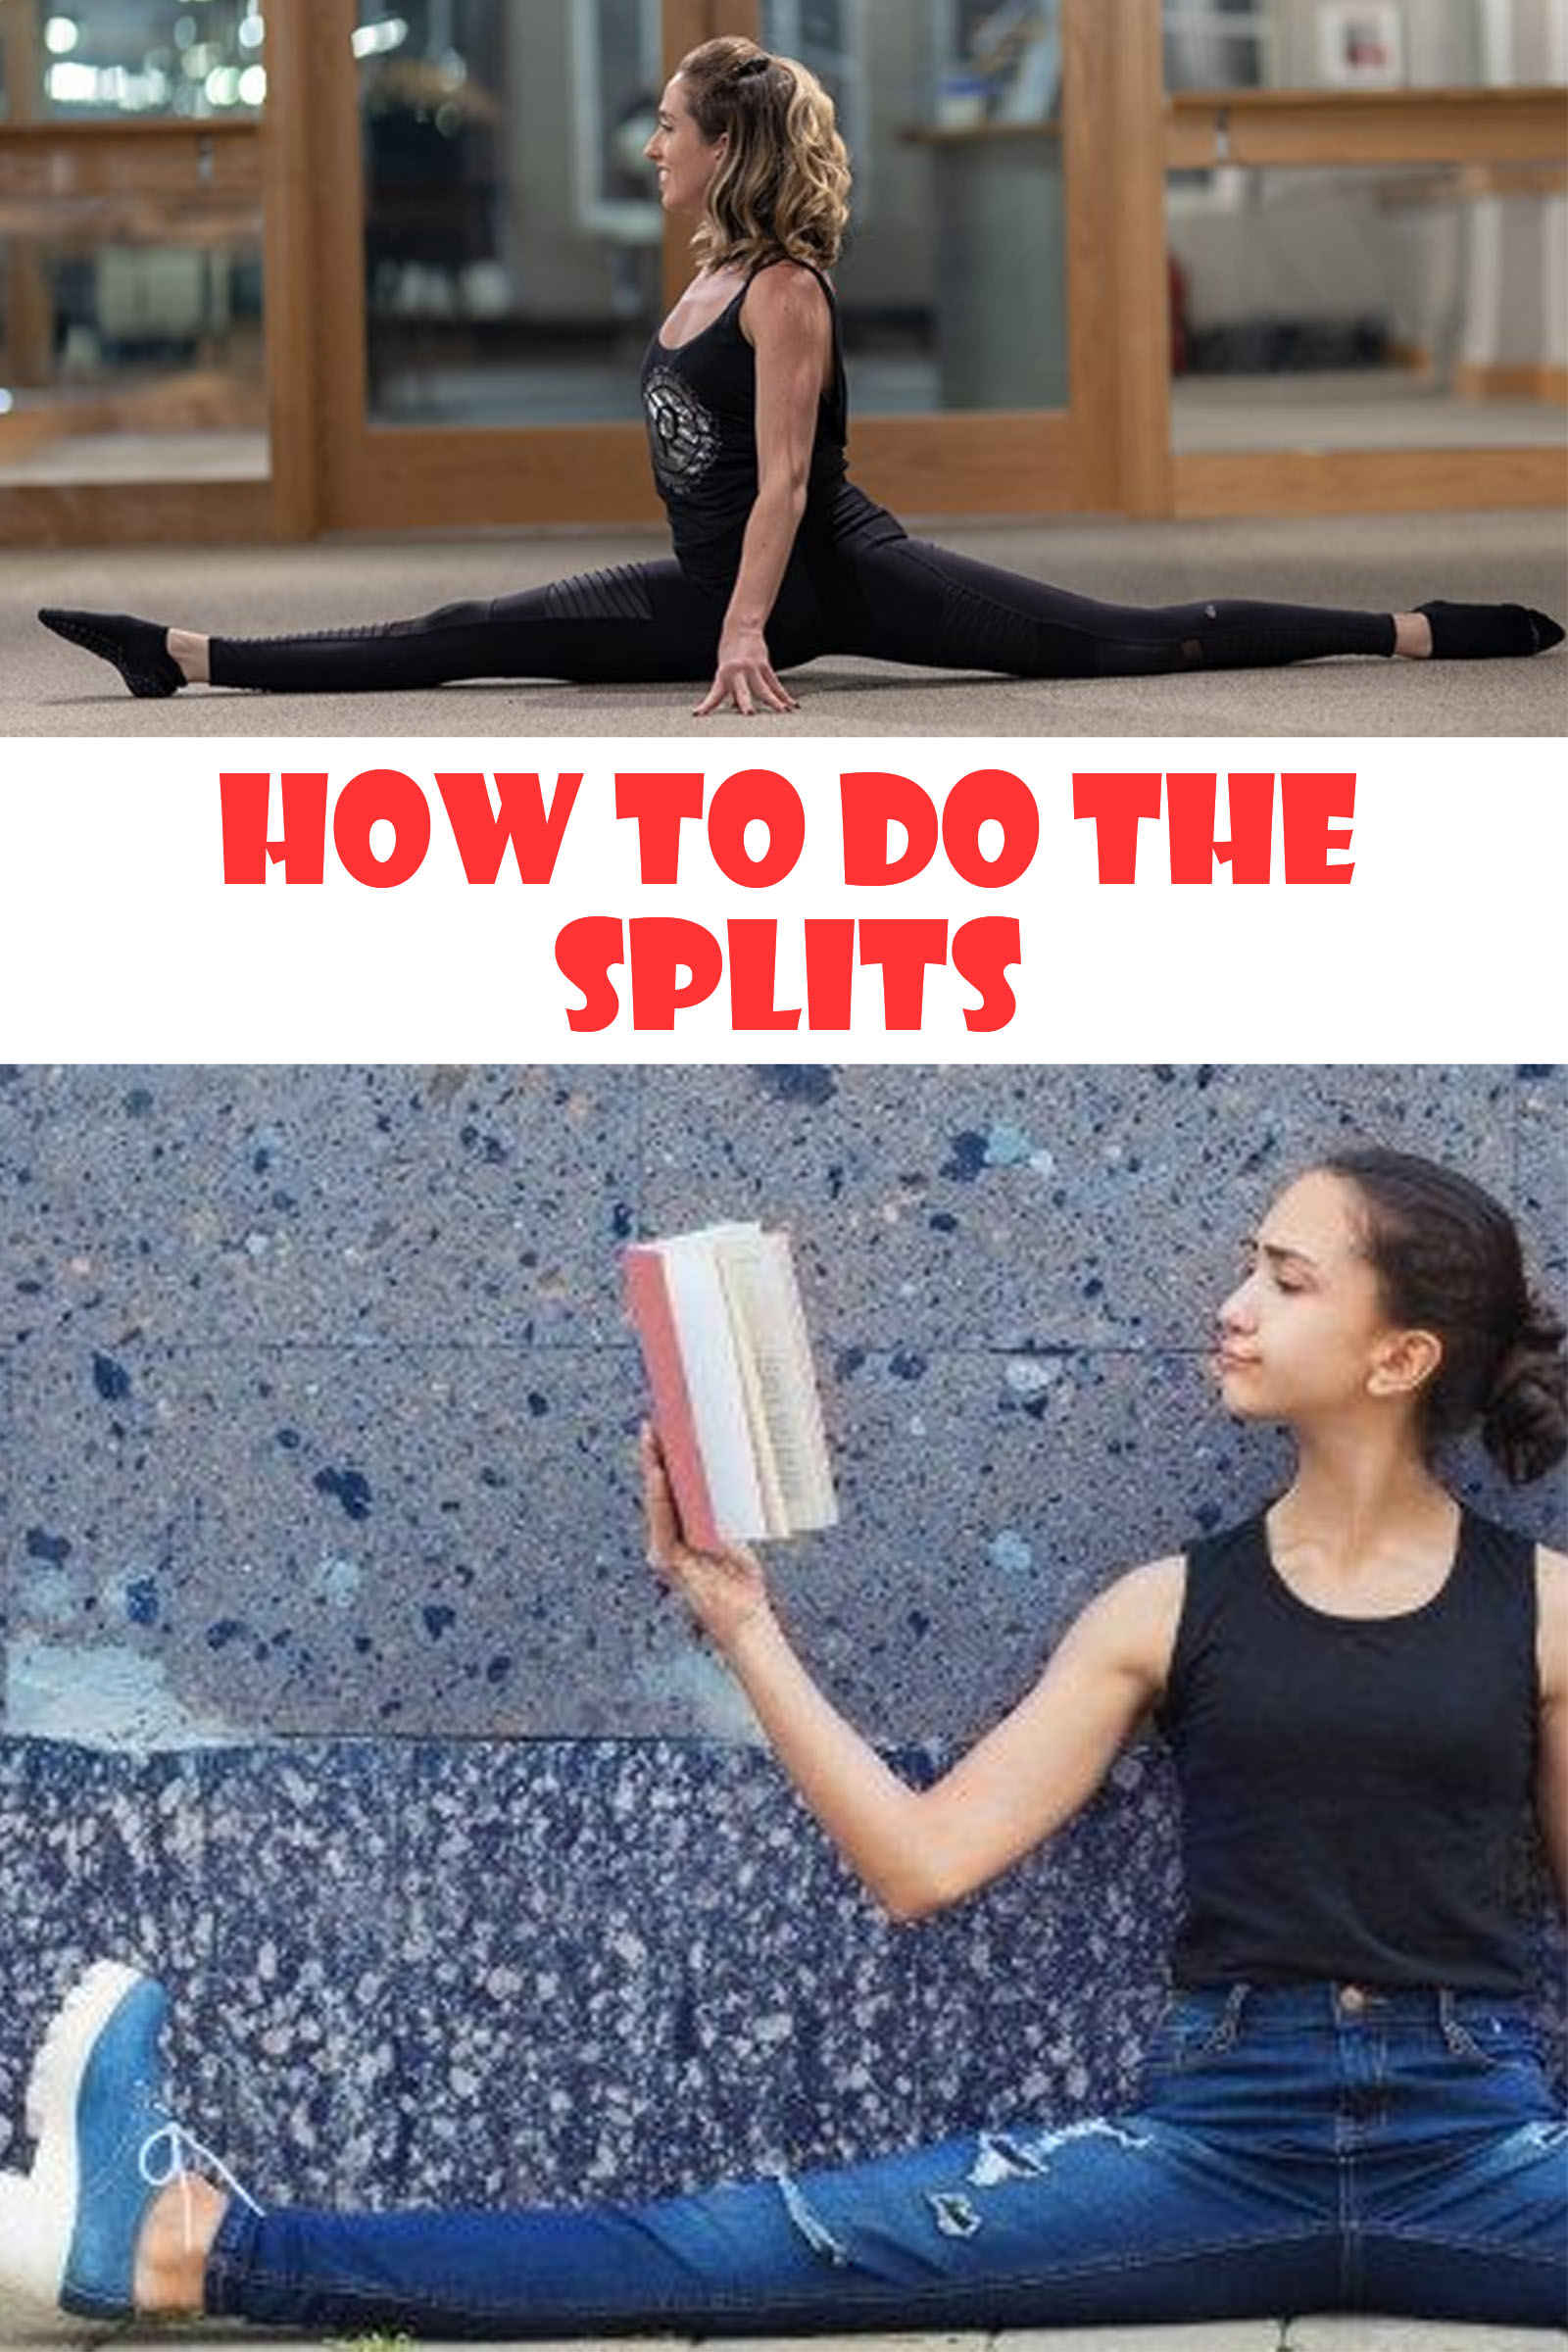 How to do the splits with 12 easy tutorials